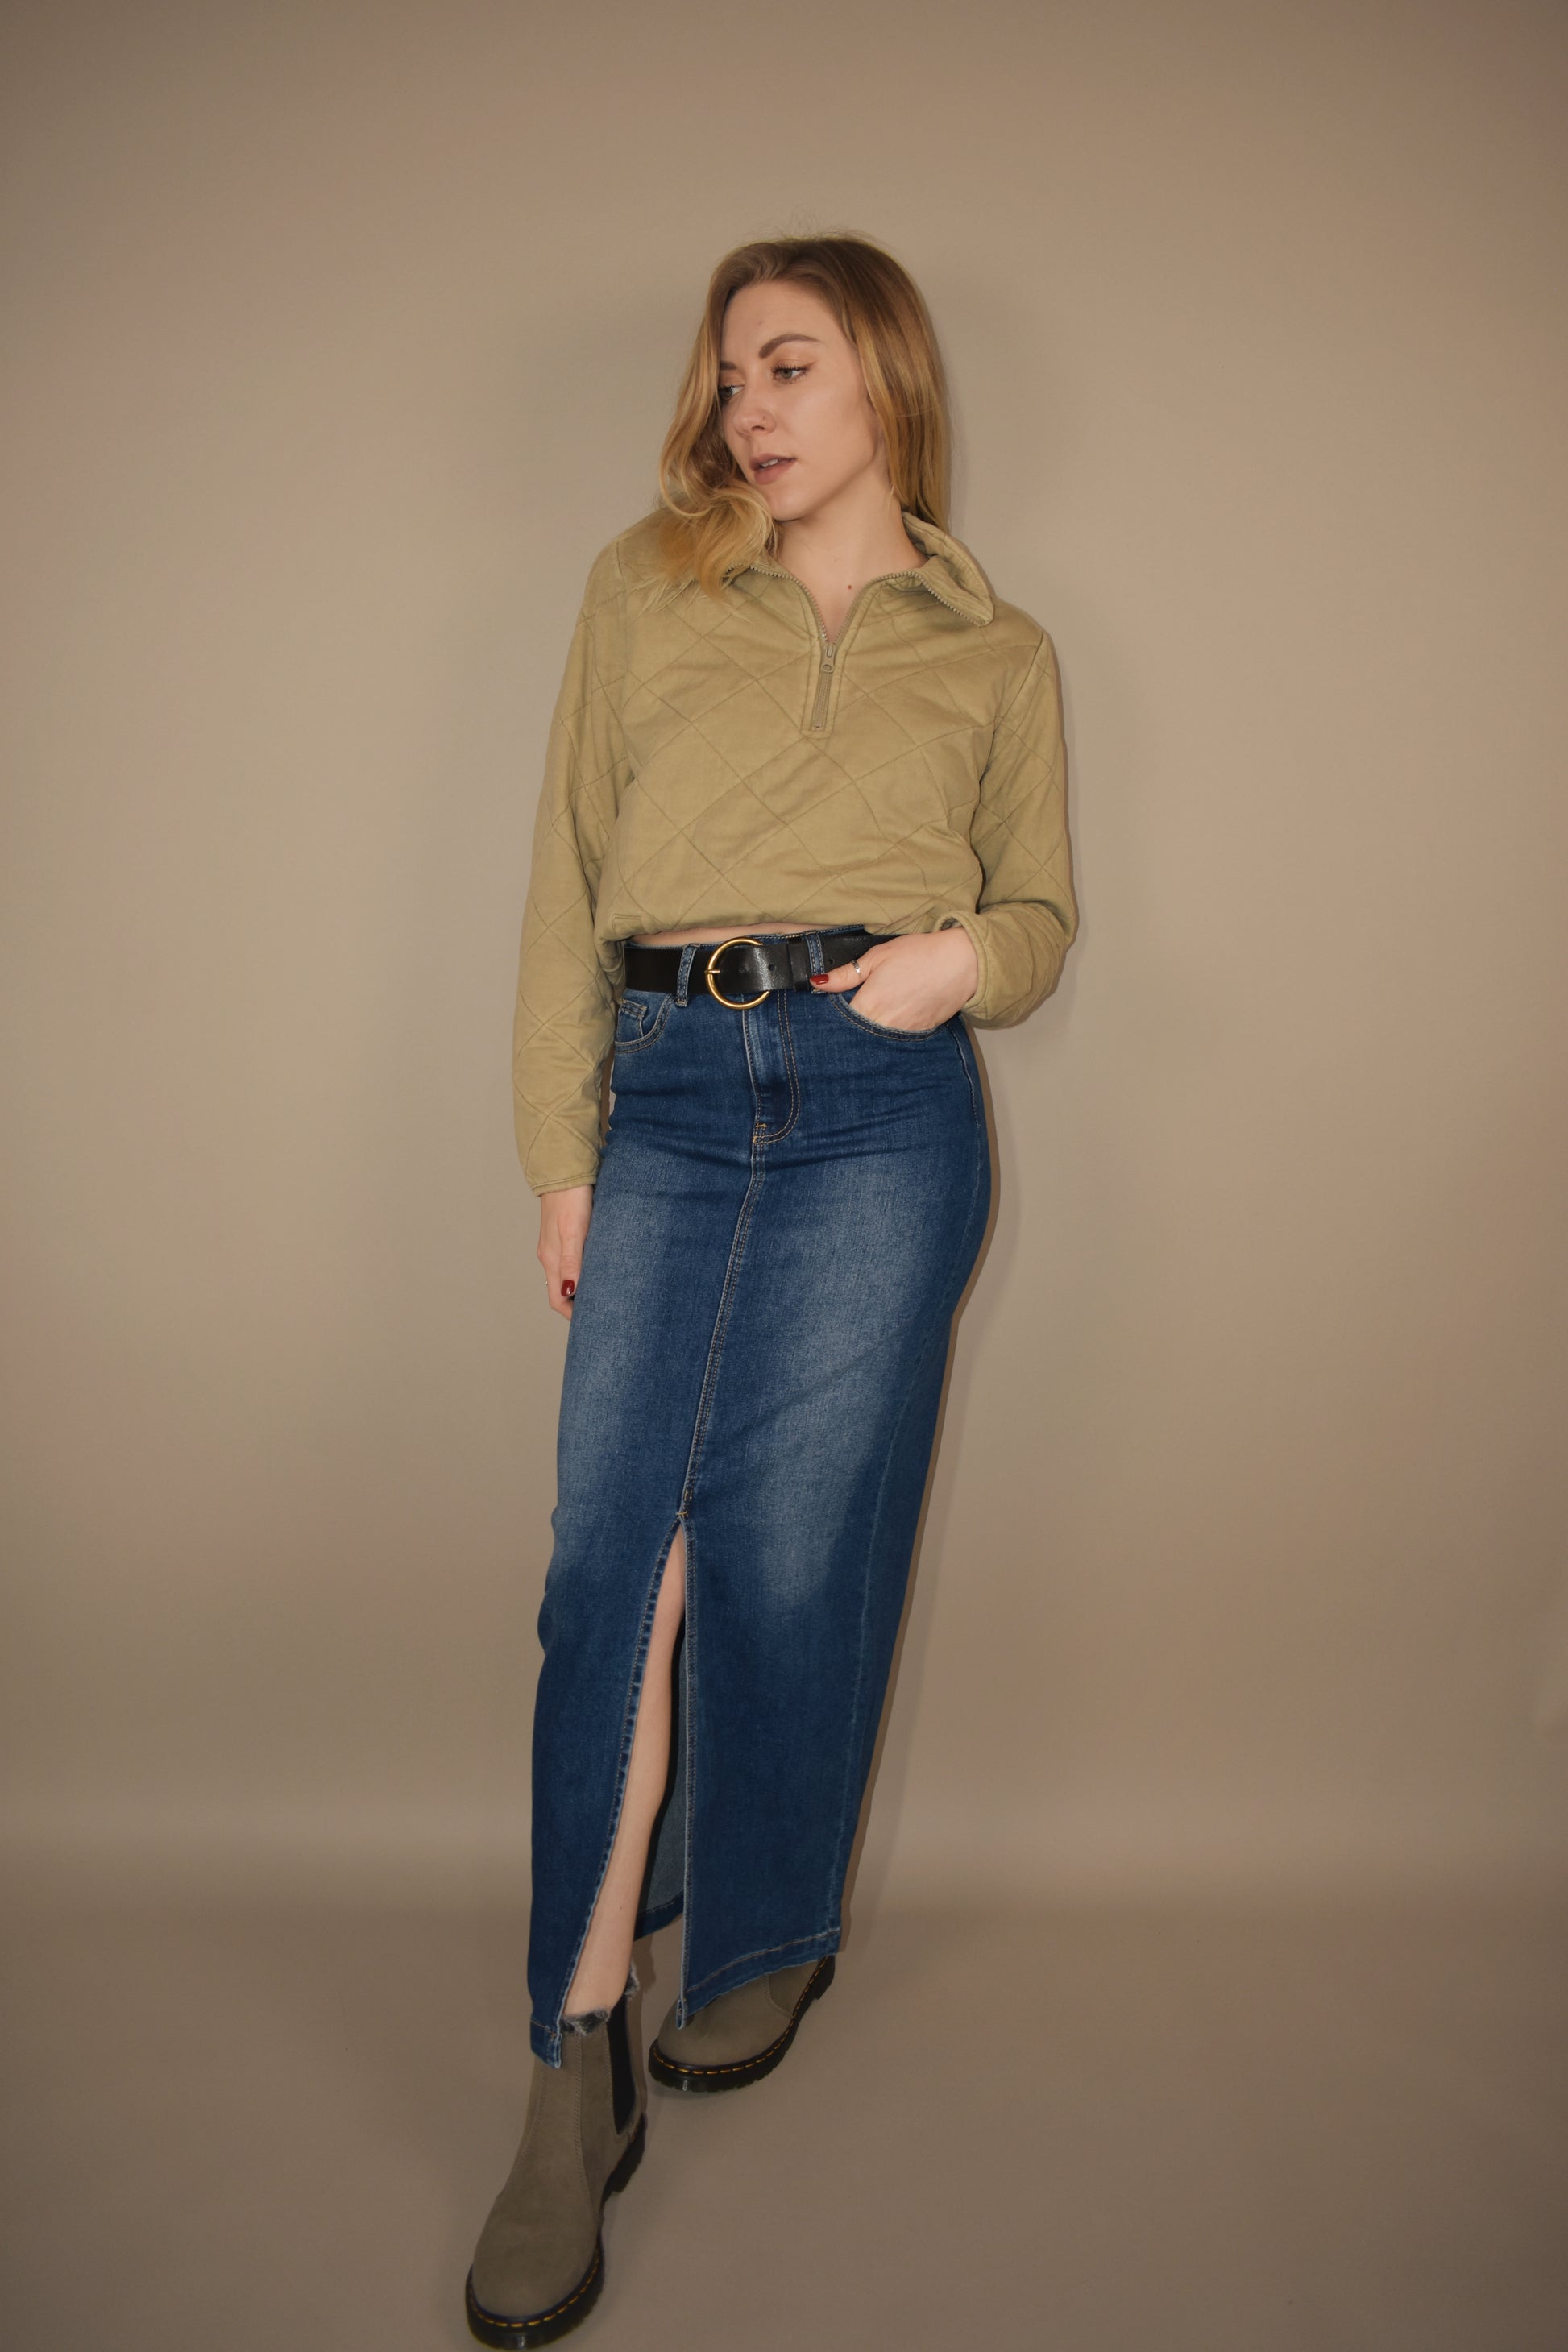 denim midi skirt that is more full length than midi and has a front slit with front and back pockets and is high waisted. made of stretch denim and is a medium dark wash.